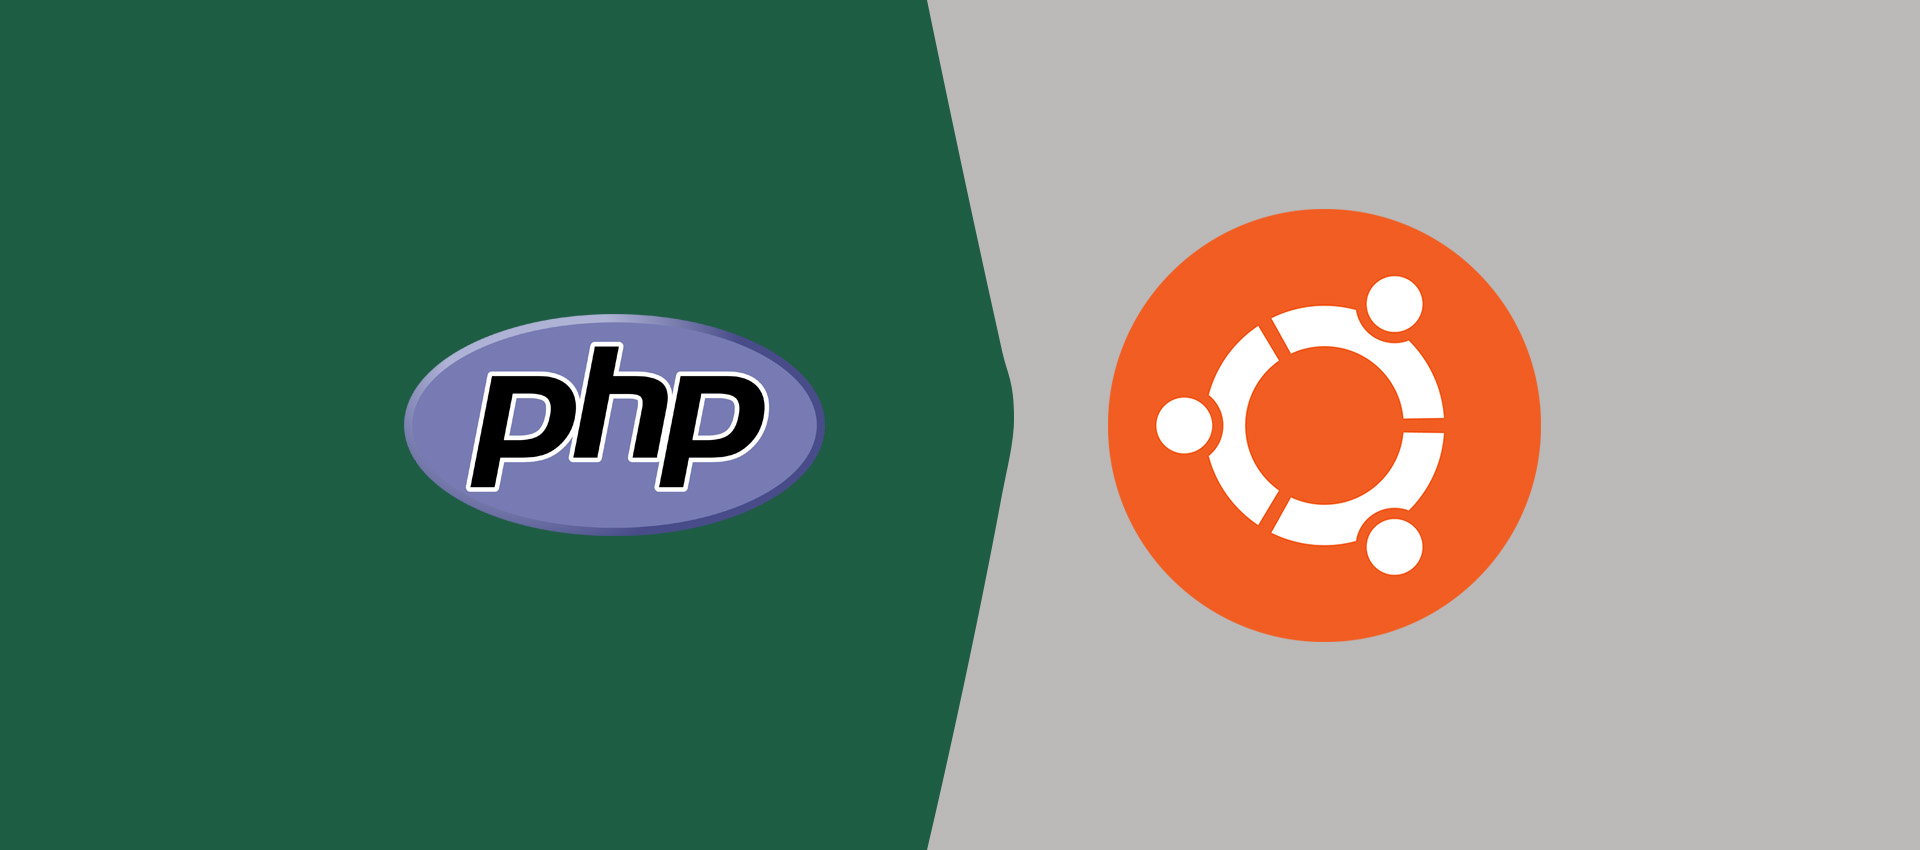 How To Install PHP 8 On Ubuntu 22.04 LTS